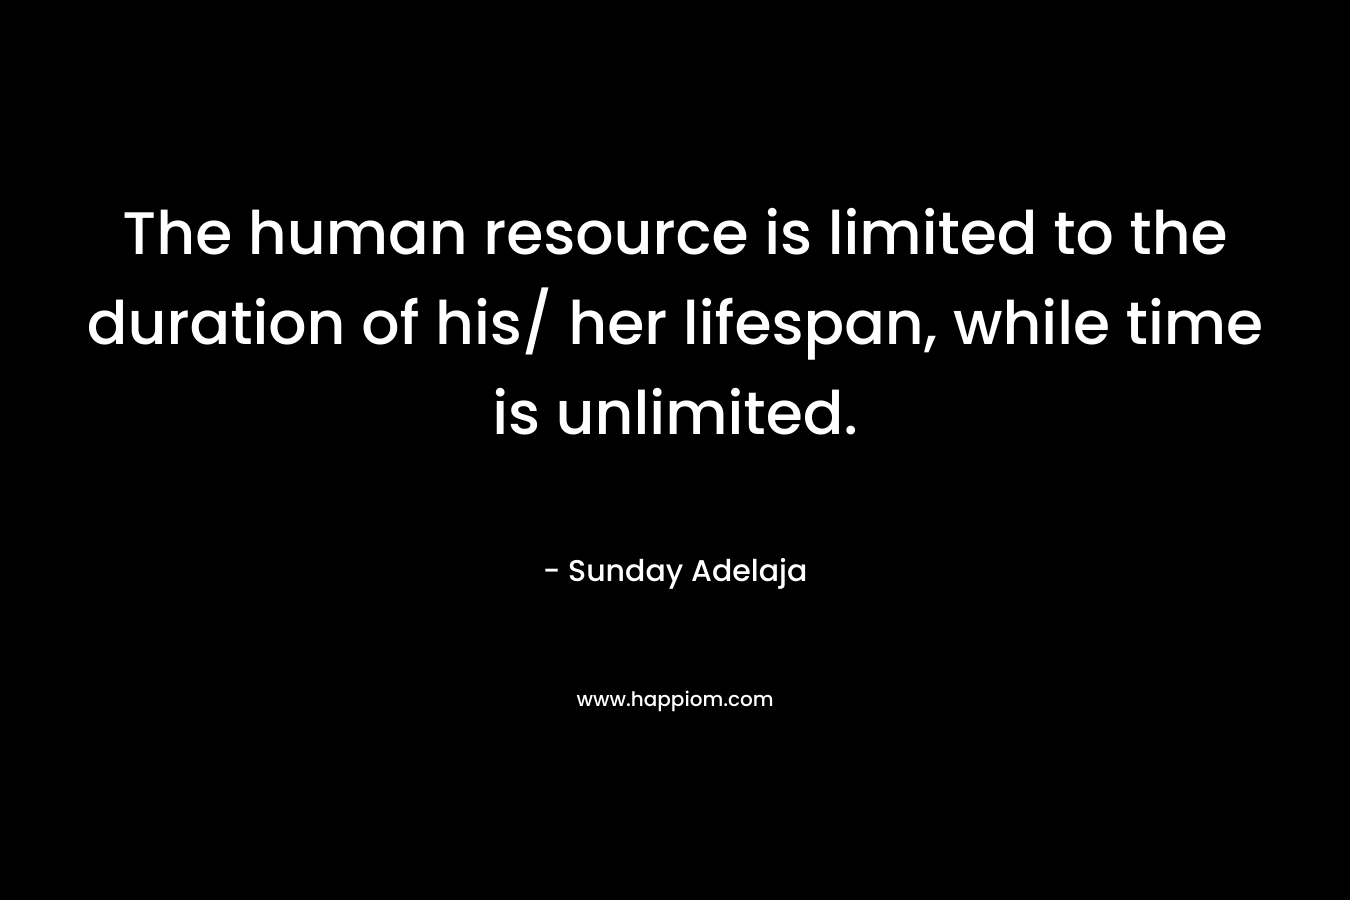 The human resource is limited to the duration of his/ her lifespan, while time is unlimited. – Sunday Adelaja